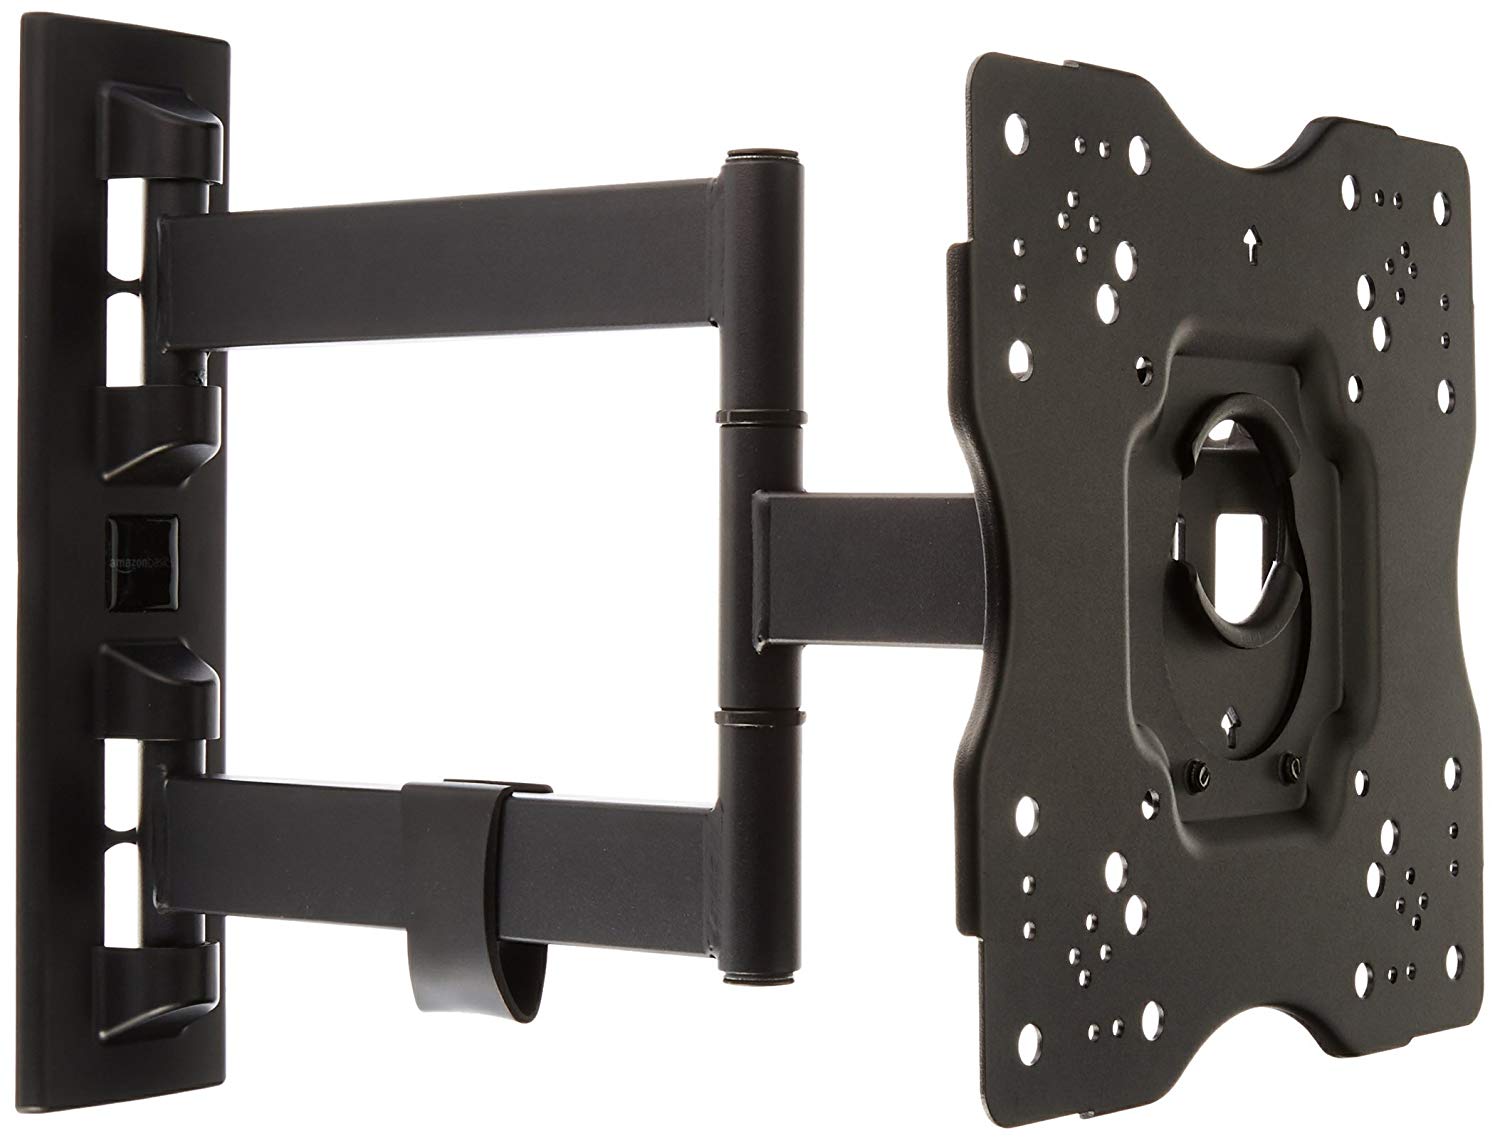 Wall Fireplace Amazon Lovely Amazonbasics Heavy Duty Full Motion Articulating Tv Wall Mount for 22 Inch to 55 Inch Led Lcd Flat Screen Tvs